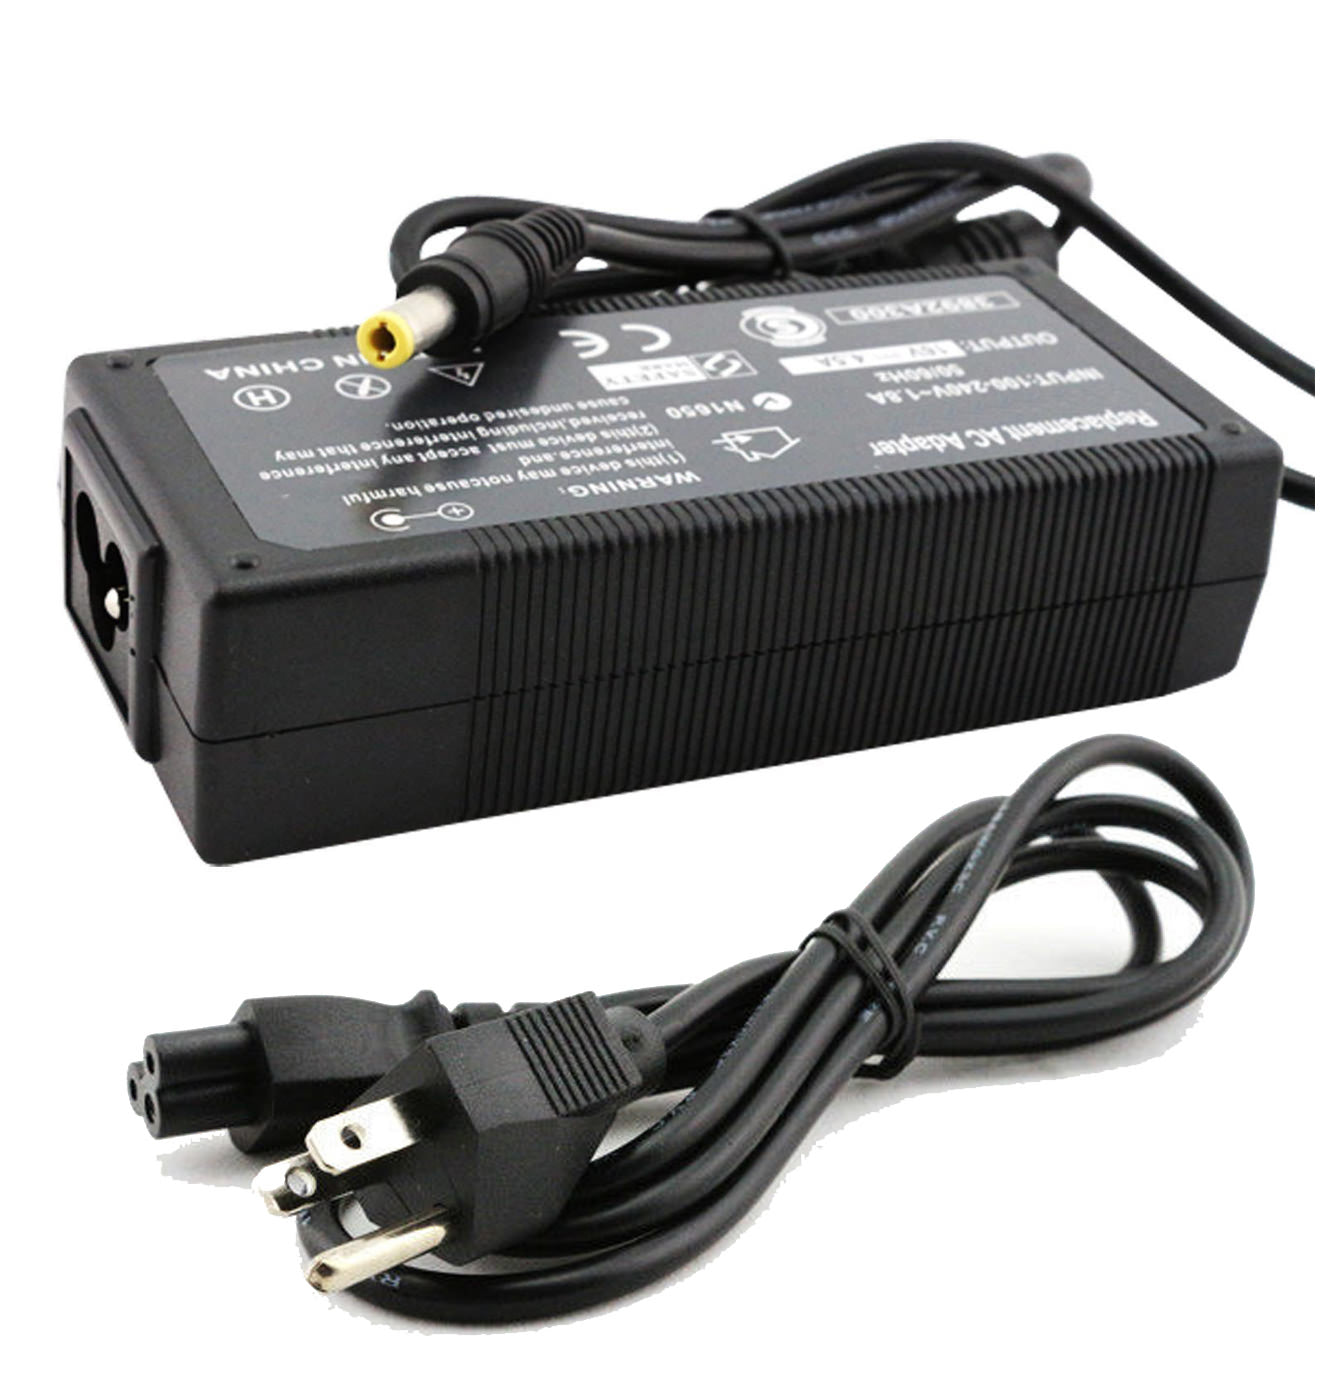 AC Adapter Charger for IBM ThinkPad T41 Notebook.